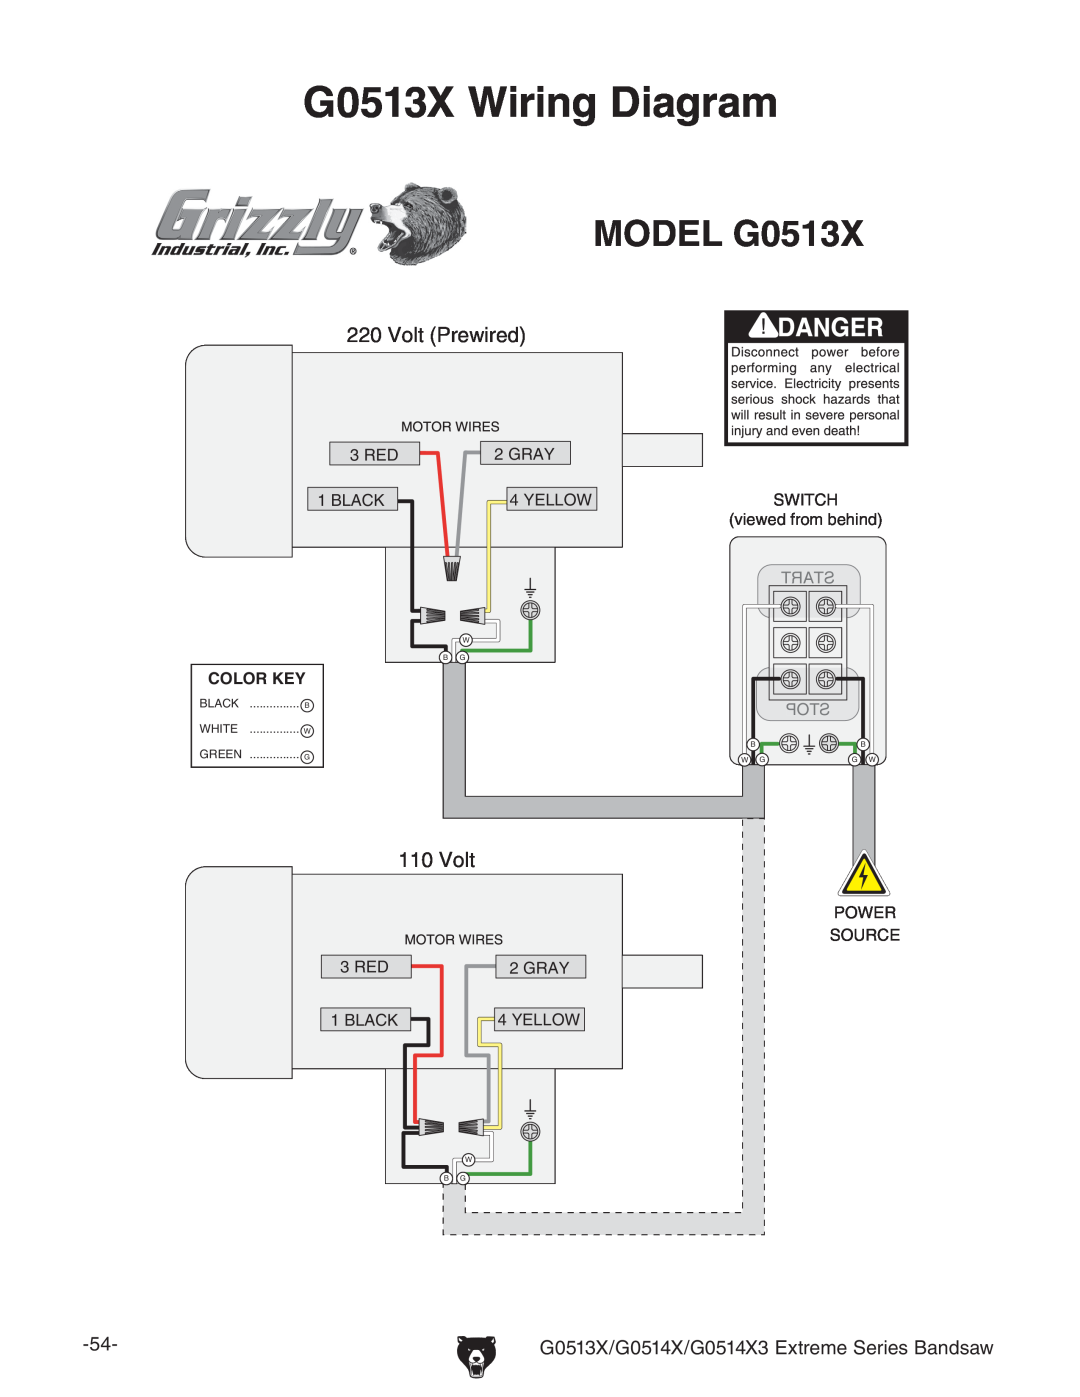 Grizzly G0514X3 owner manual G0513X Wiring Diagram 